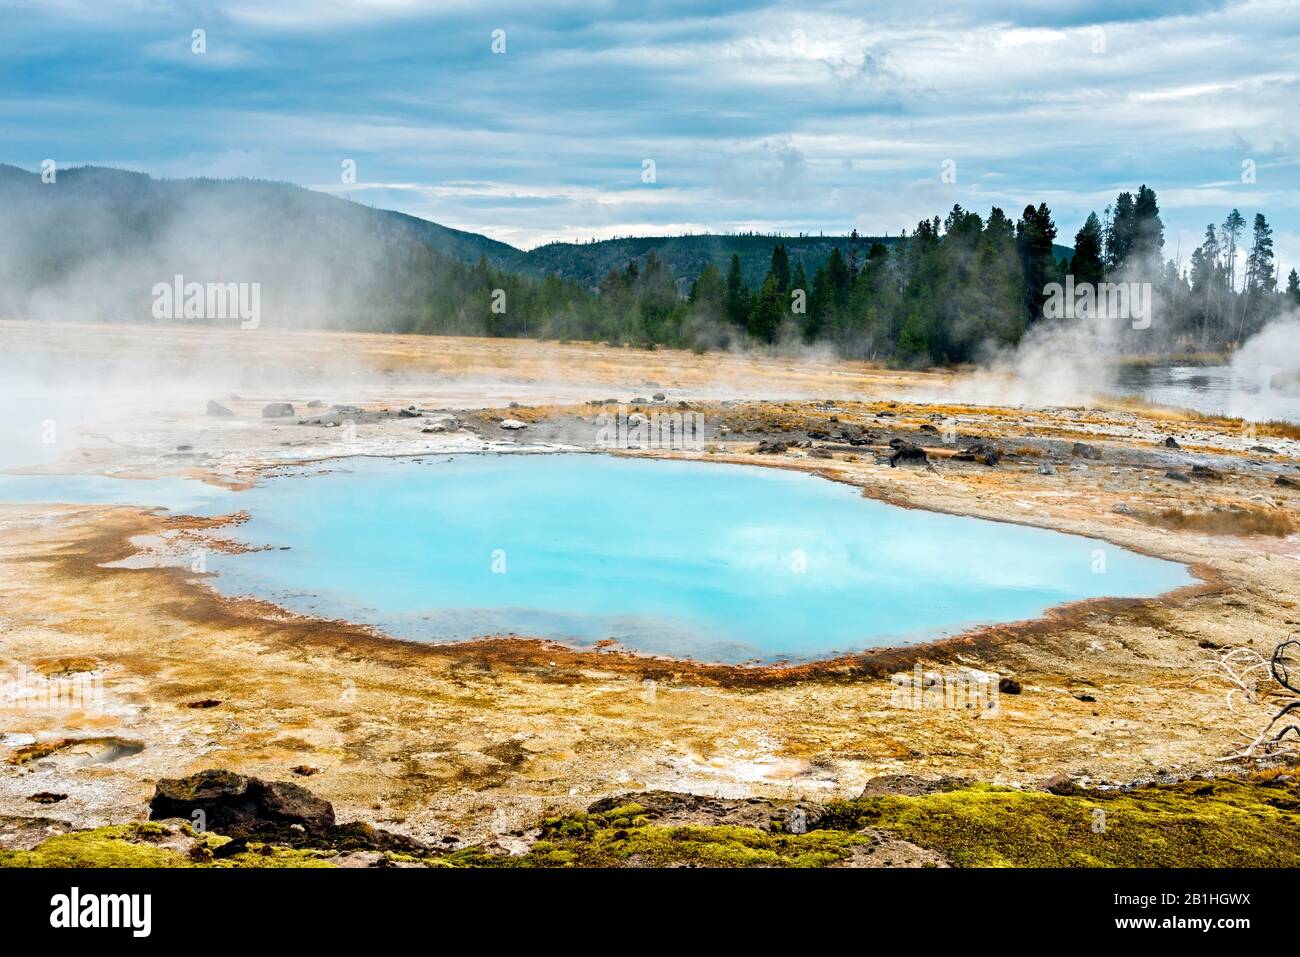 Geothermal hot spring with steam rising up off water. Stock Photo